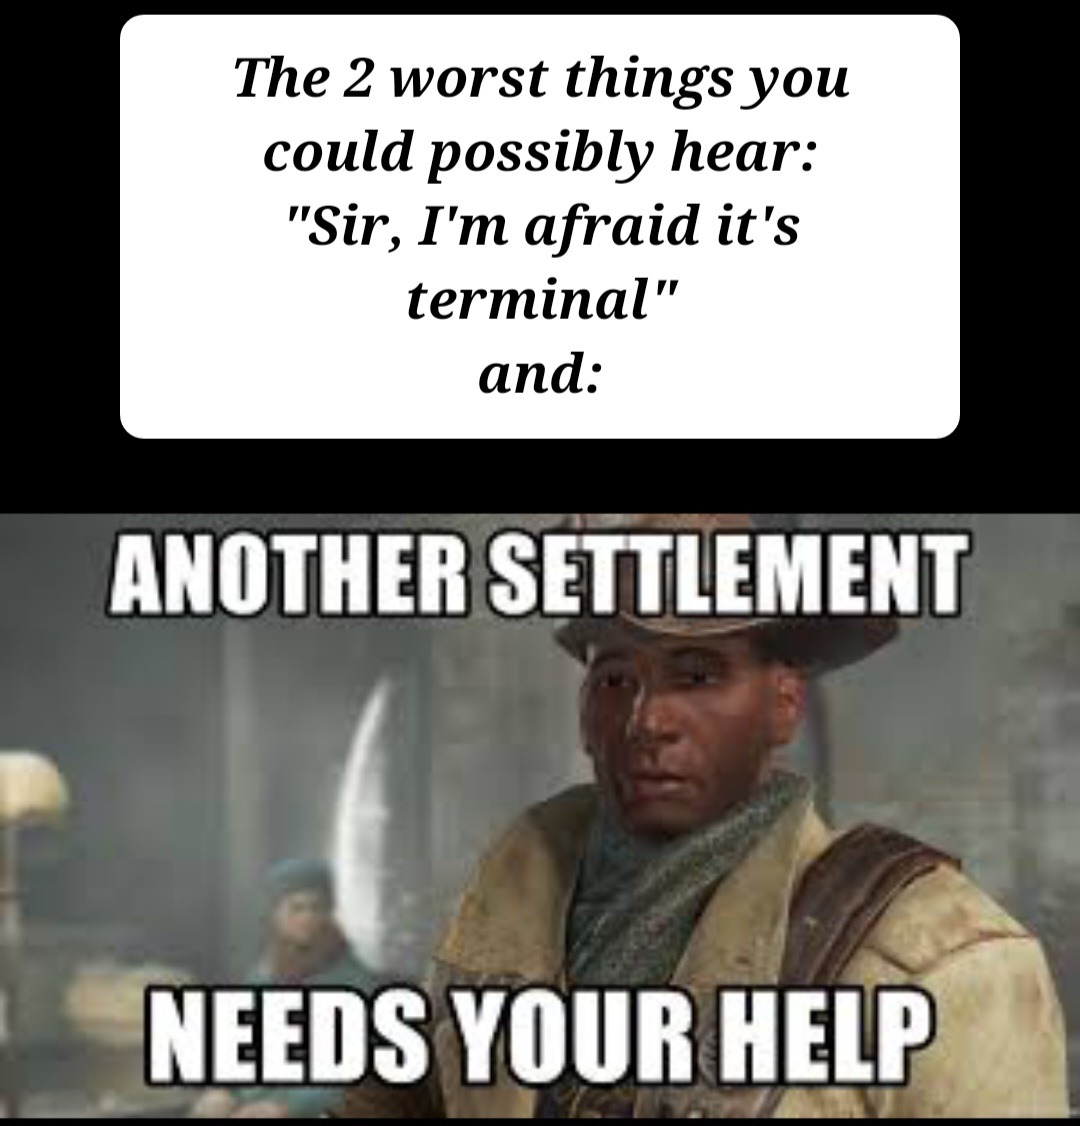 "Another settlement needs your help" - meme